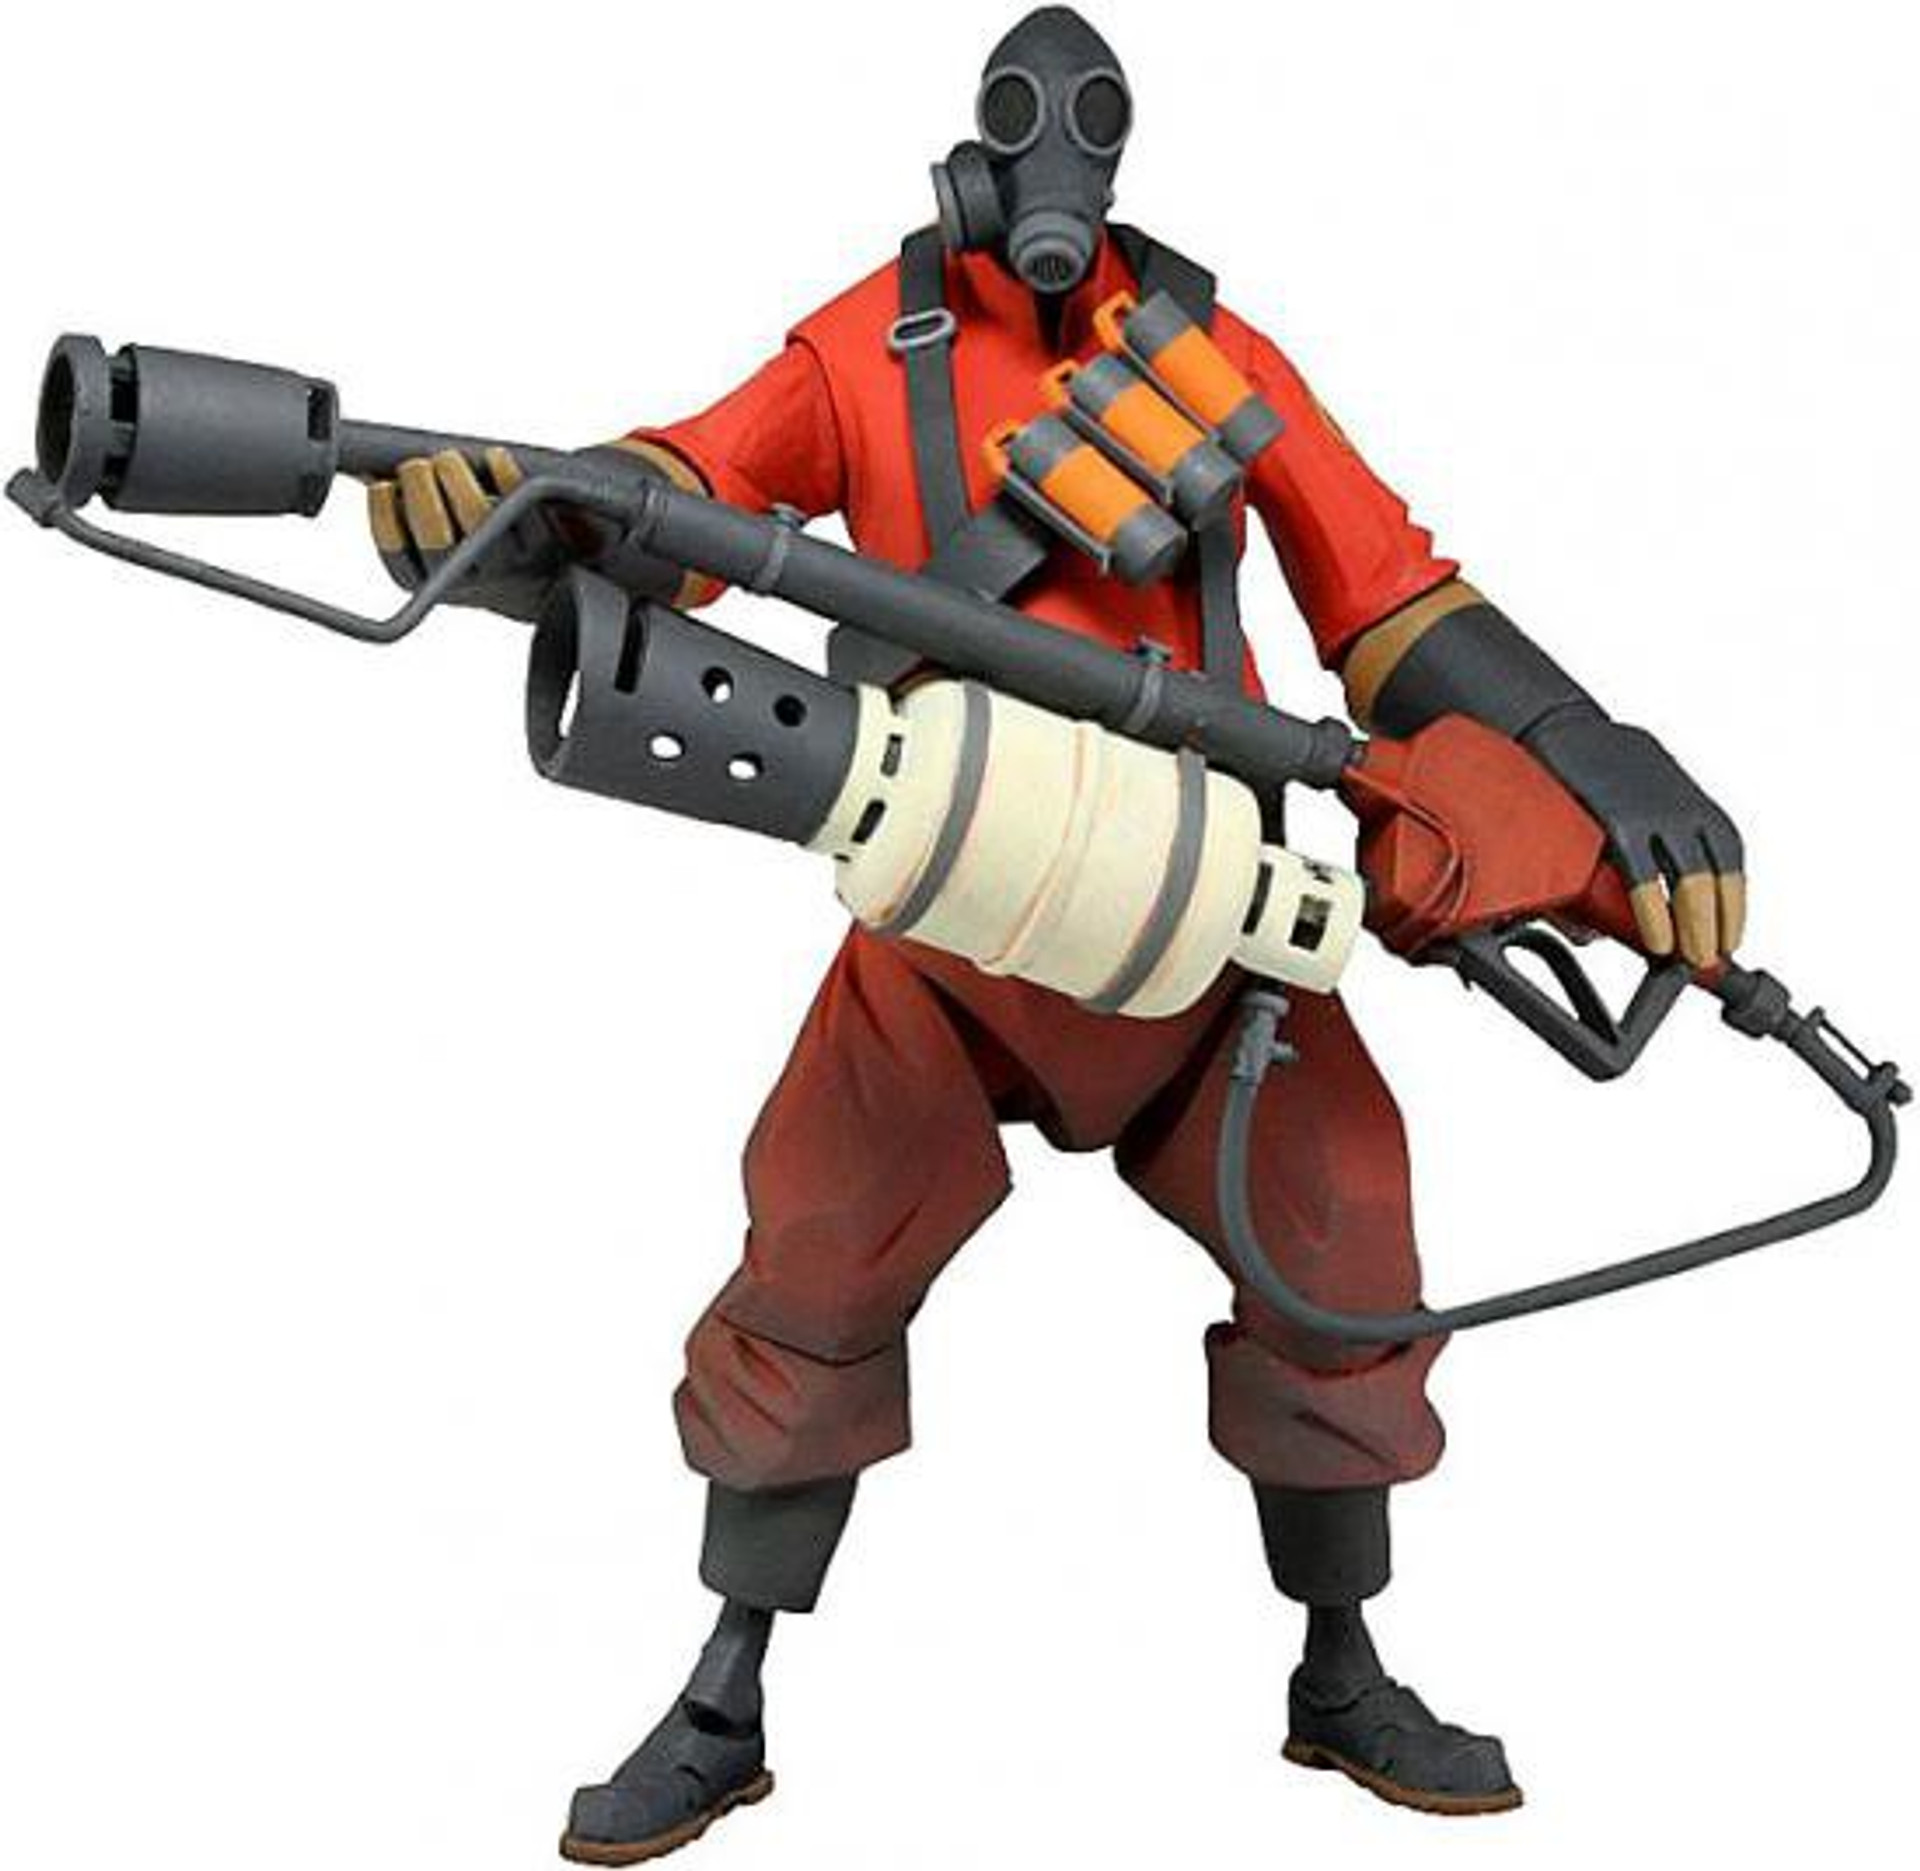 NECA Team Fortress 2 RED Series 1 The Pyro Action Figure - Apiauxnjw  97001.1540472239